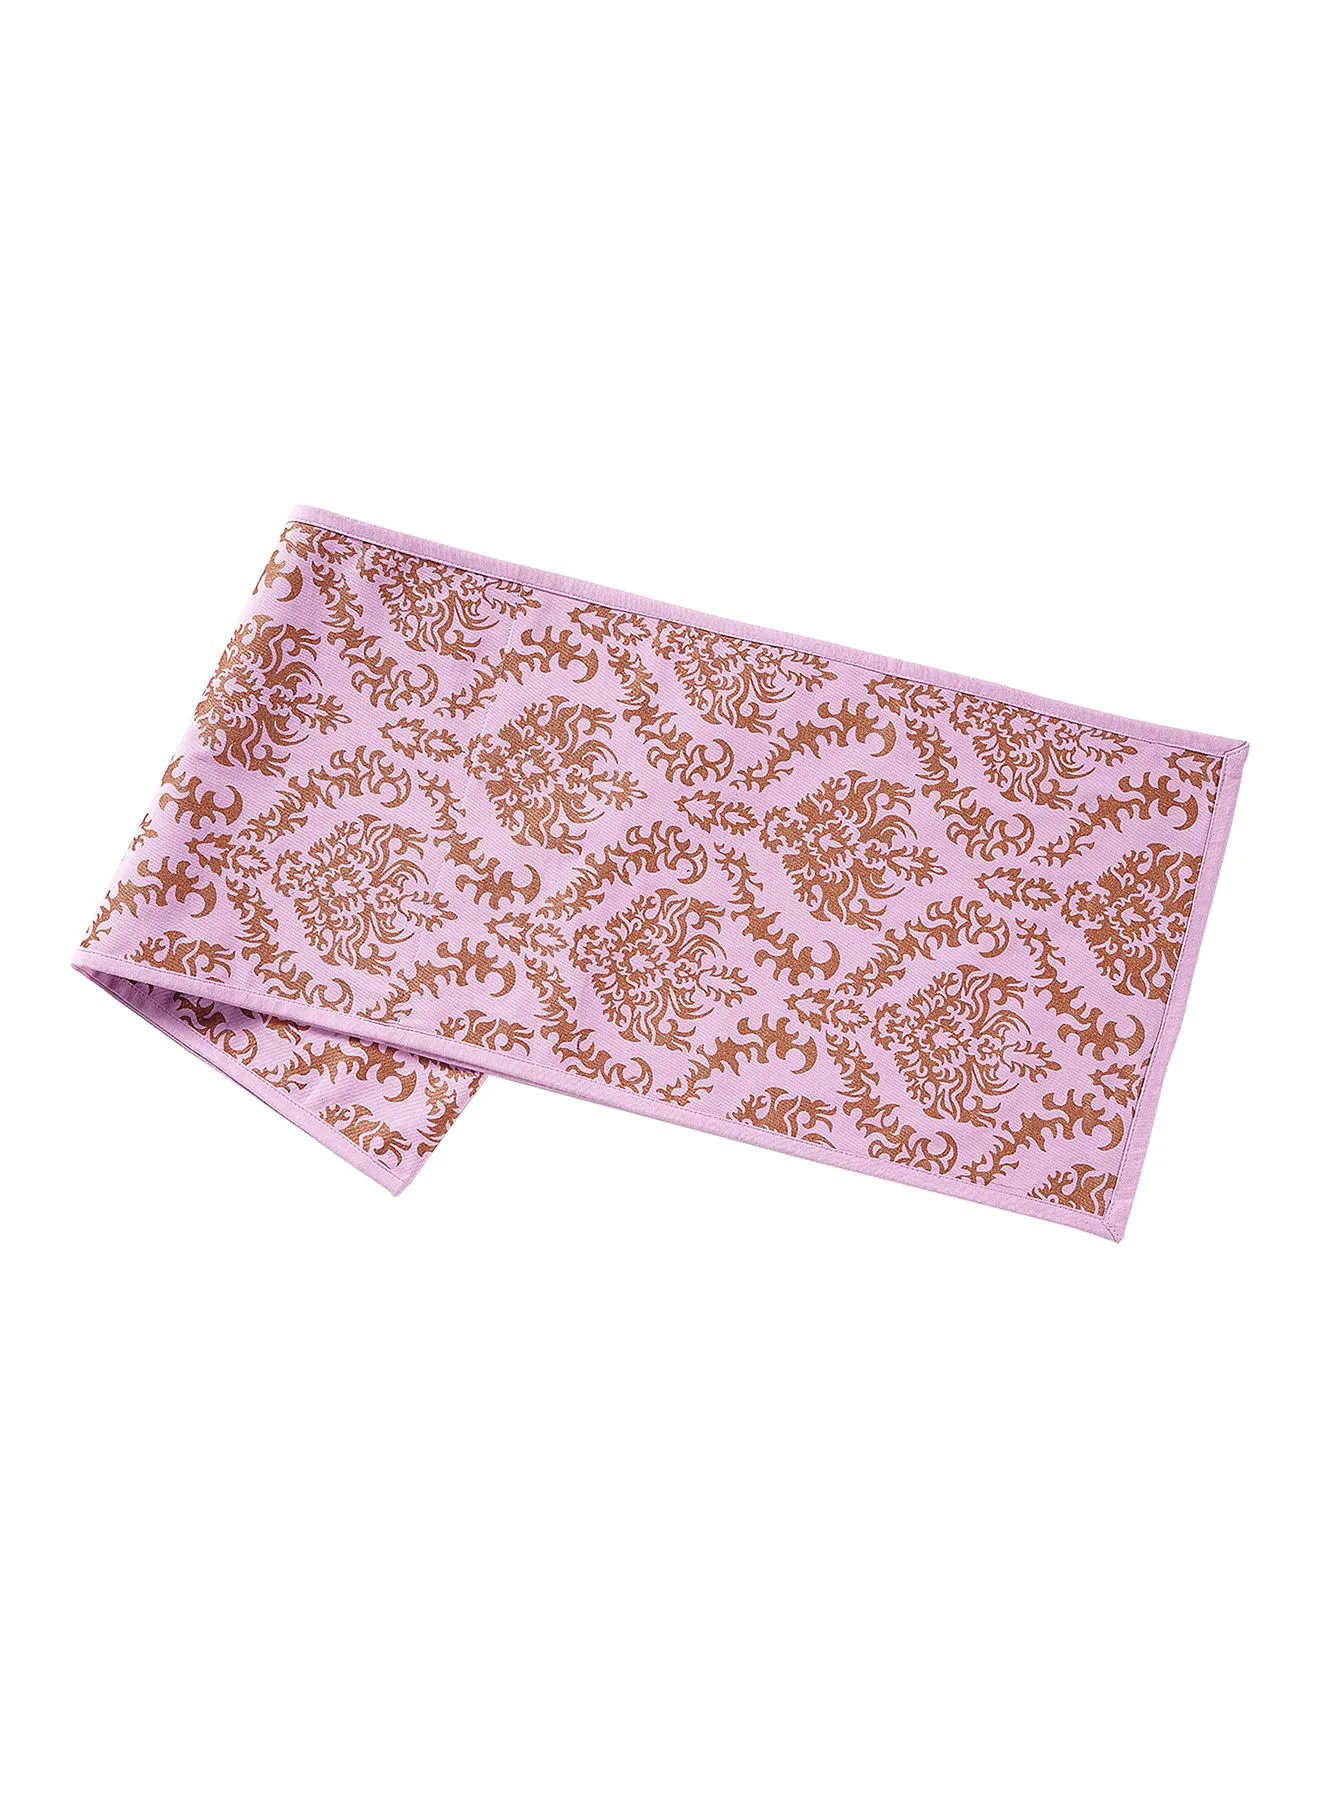 Amal Cotton Table Runner For Dining Table - Printed Table Runner - Table Linen - 30 X 180 Cm - Pink/Gold